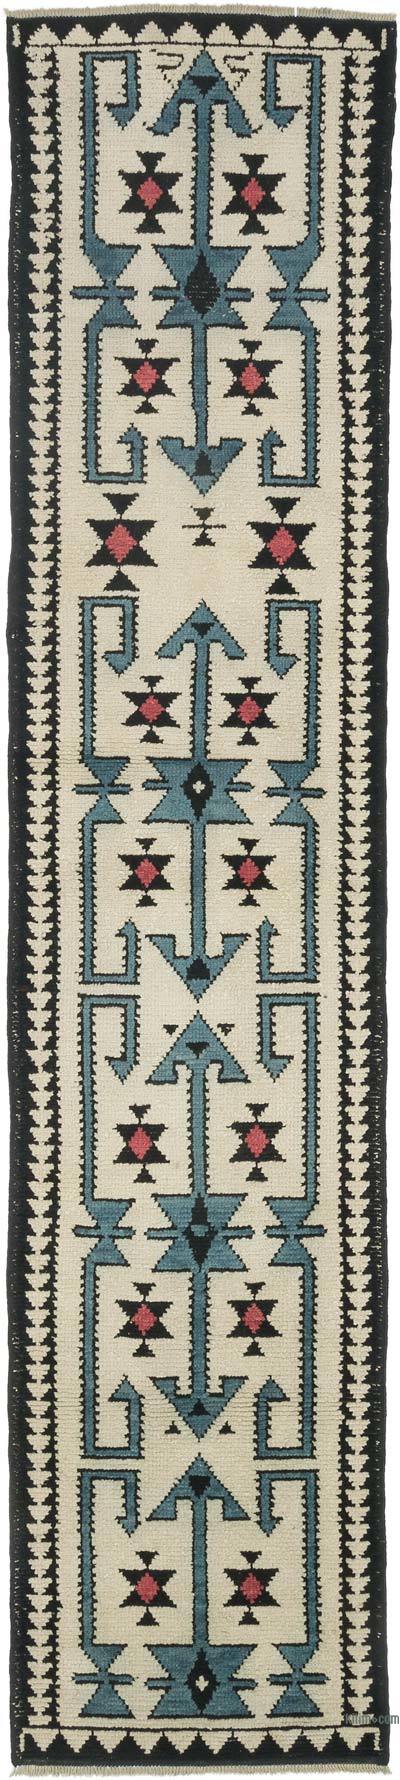 New Turkish Hand-Knotted Runner - 2' 5" x 11' 2" (29 in. x 134 in.)